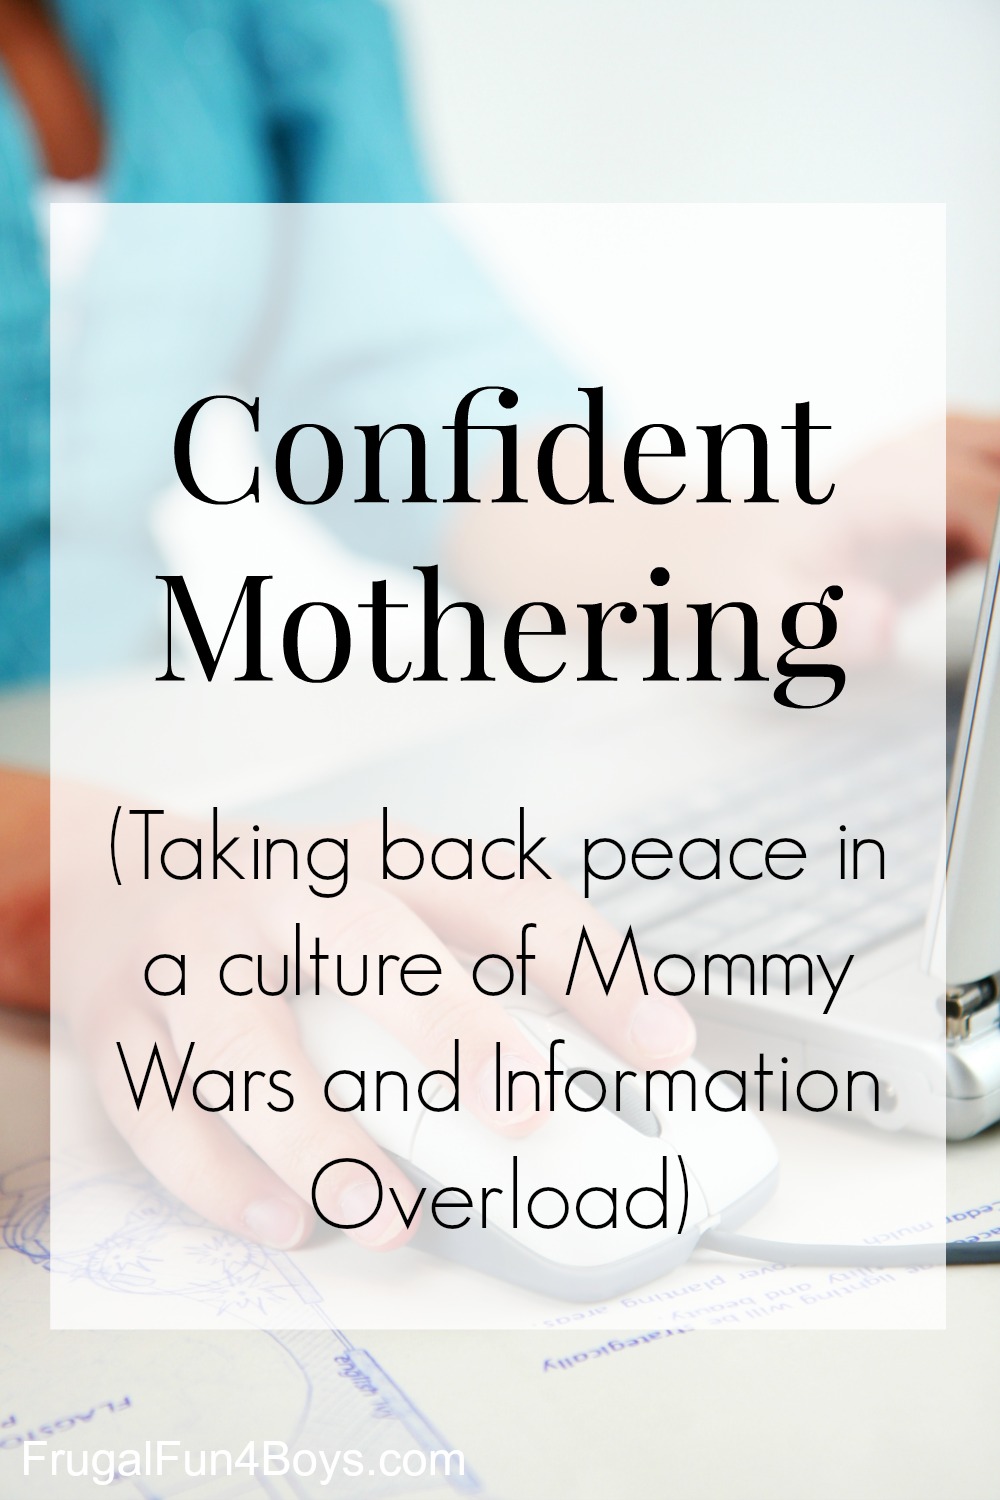 Confident Mothering:  Taking Back Peace in a Culture of Mommy Wars and Information Overload